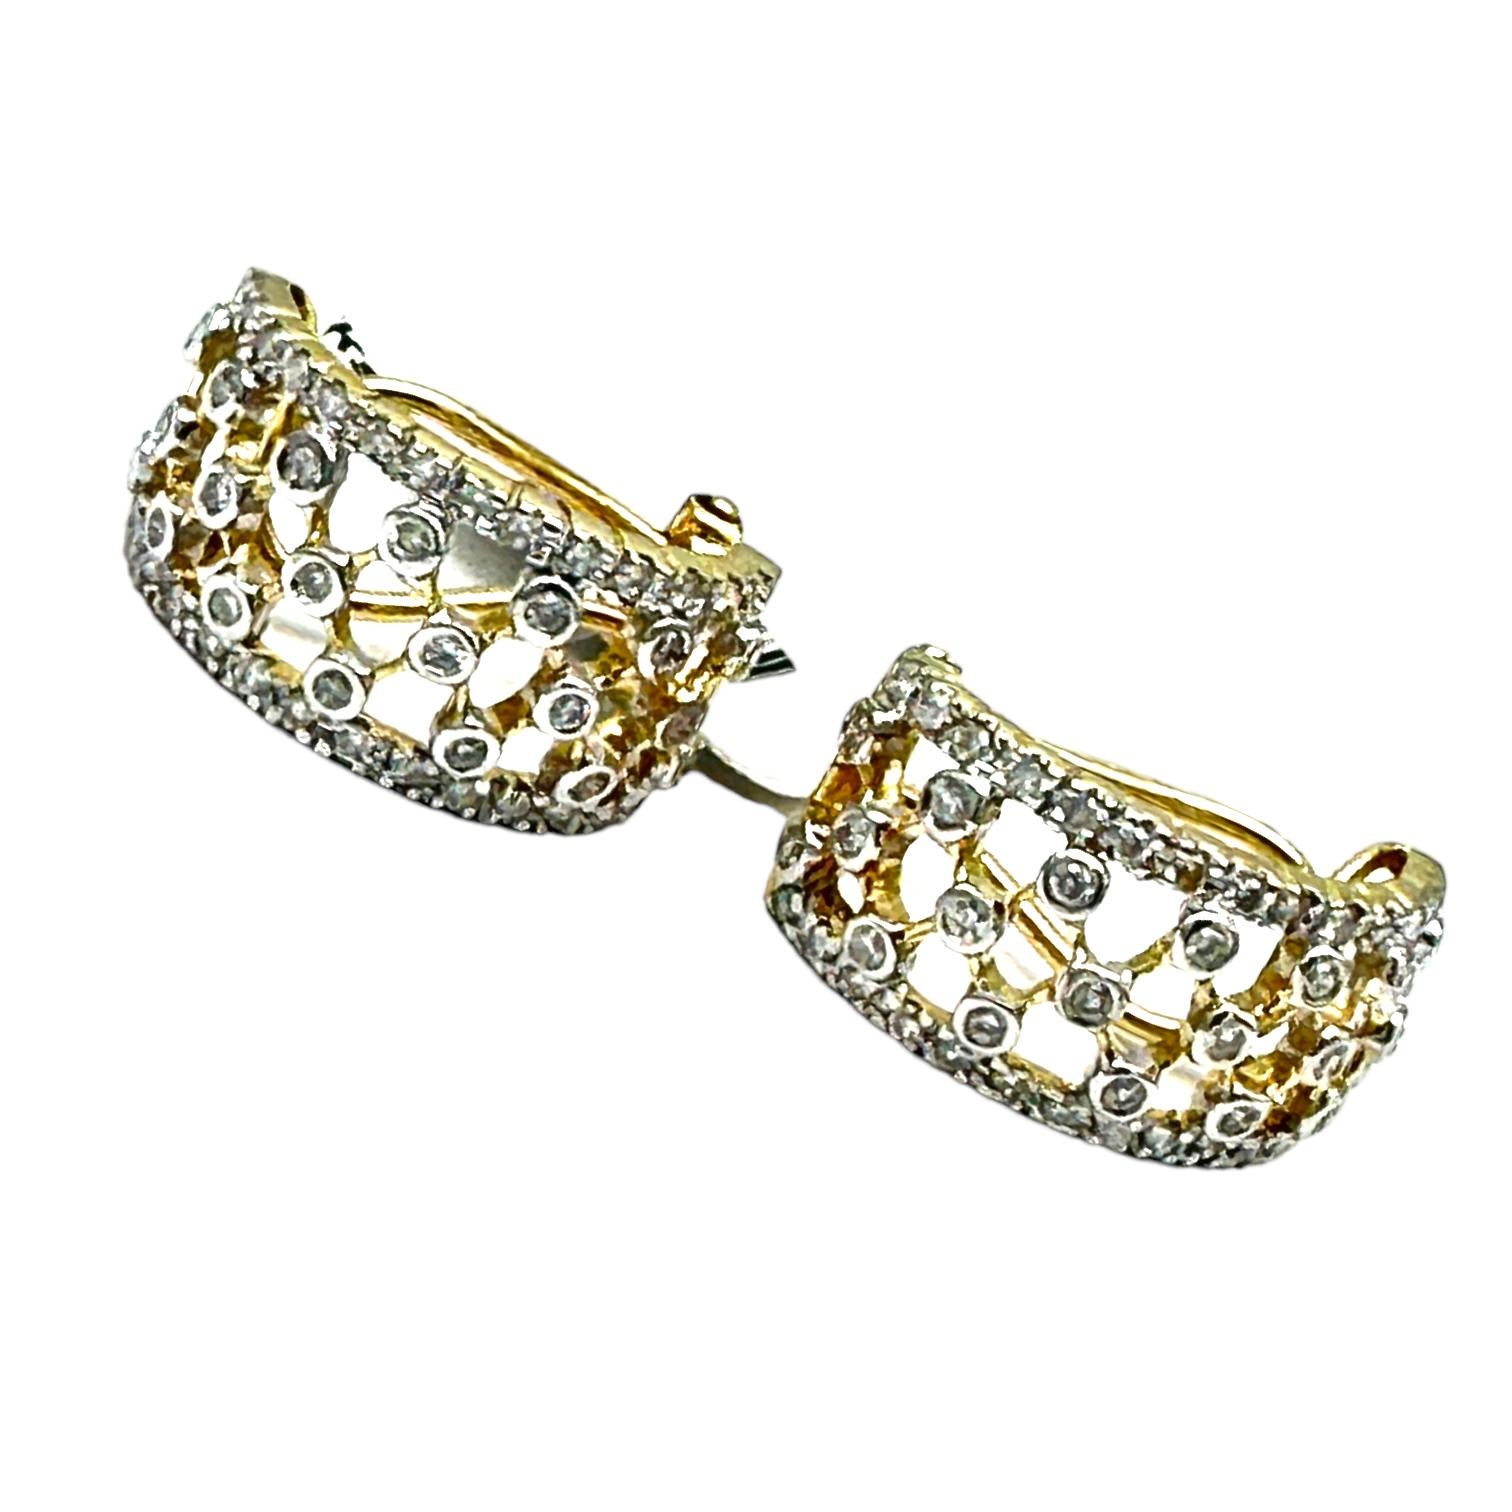 Contemporary 14K Yellow Gold 1.20 Ct. Diamond Clip-On Earrings 